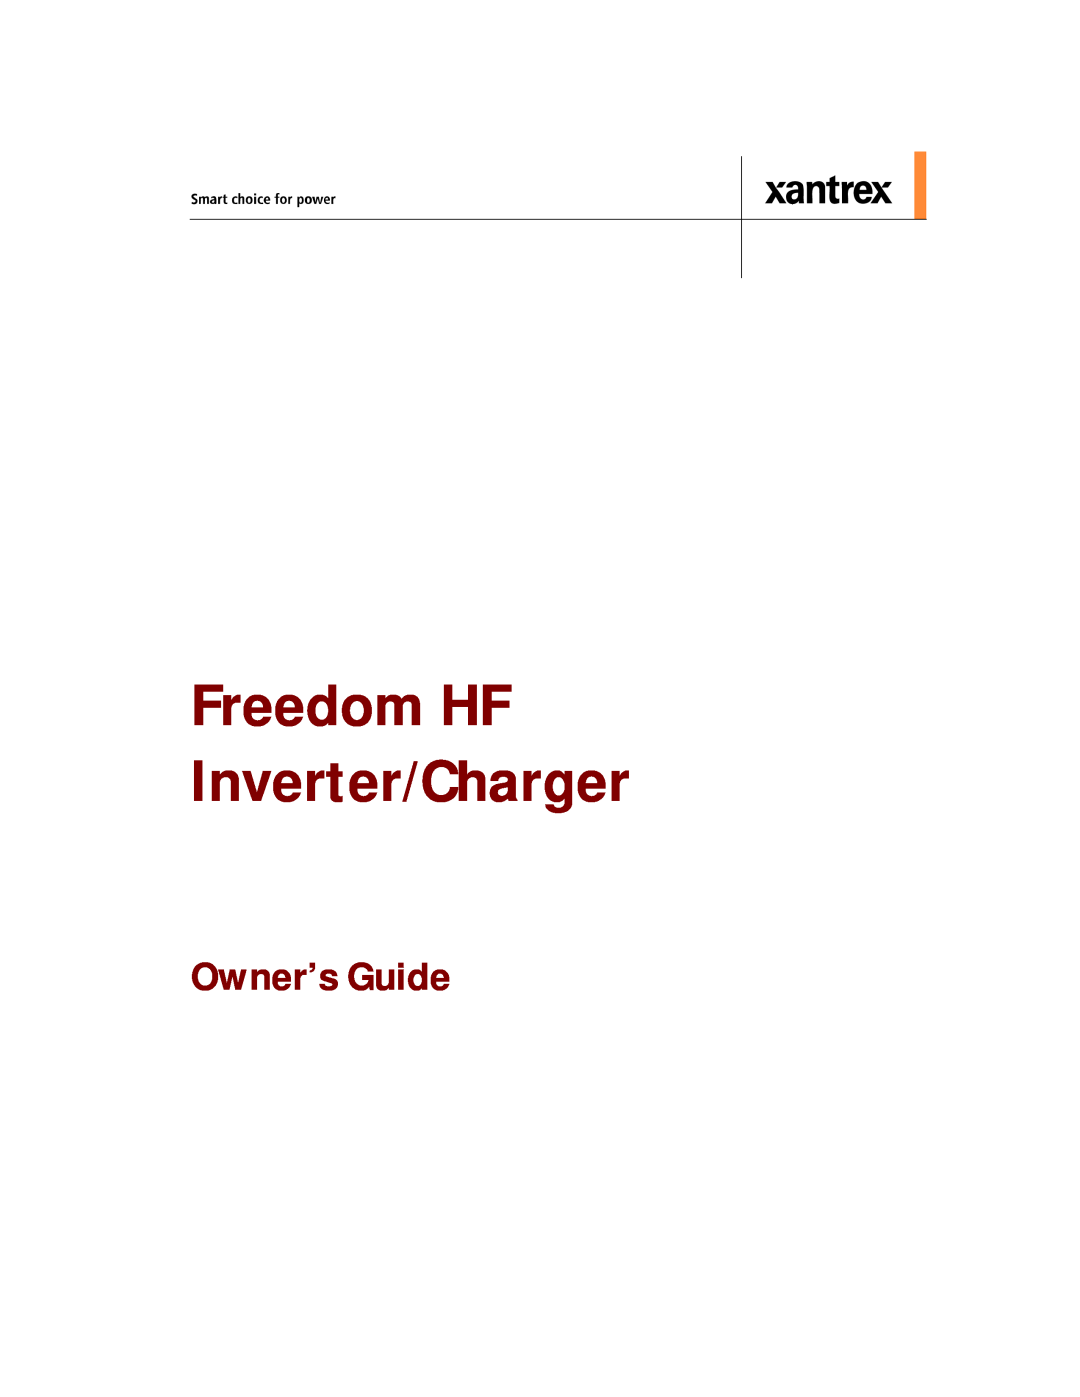 Xantrex Technology HF 1800, HF 1000 manual Freedom HF Inverter/Charger, Owner’s Guide 